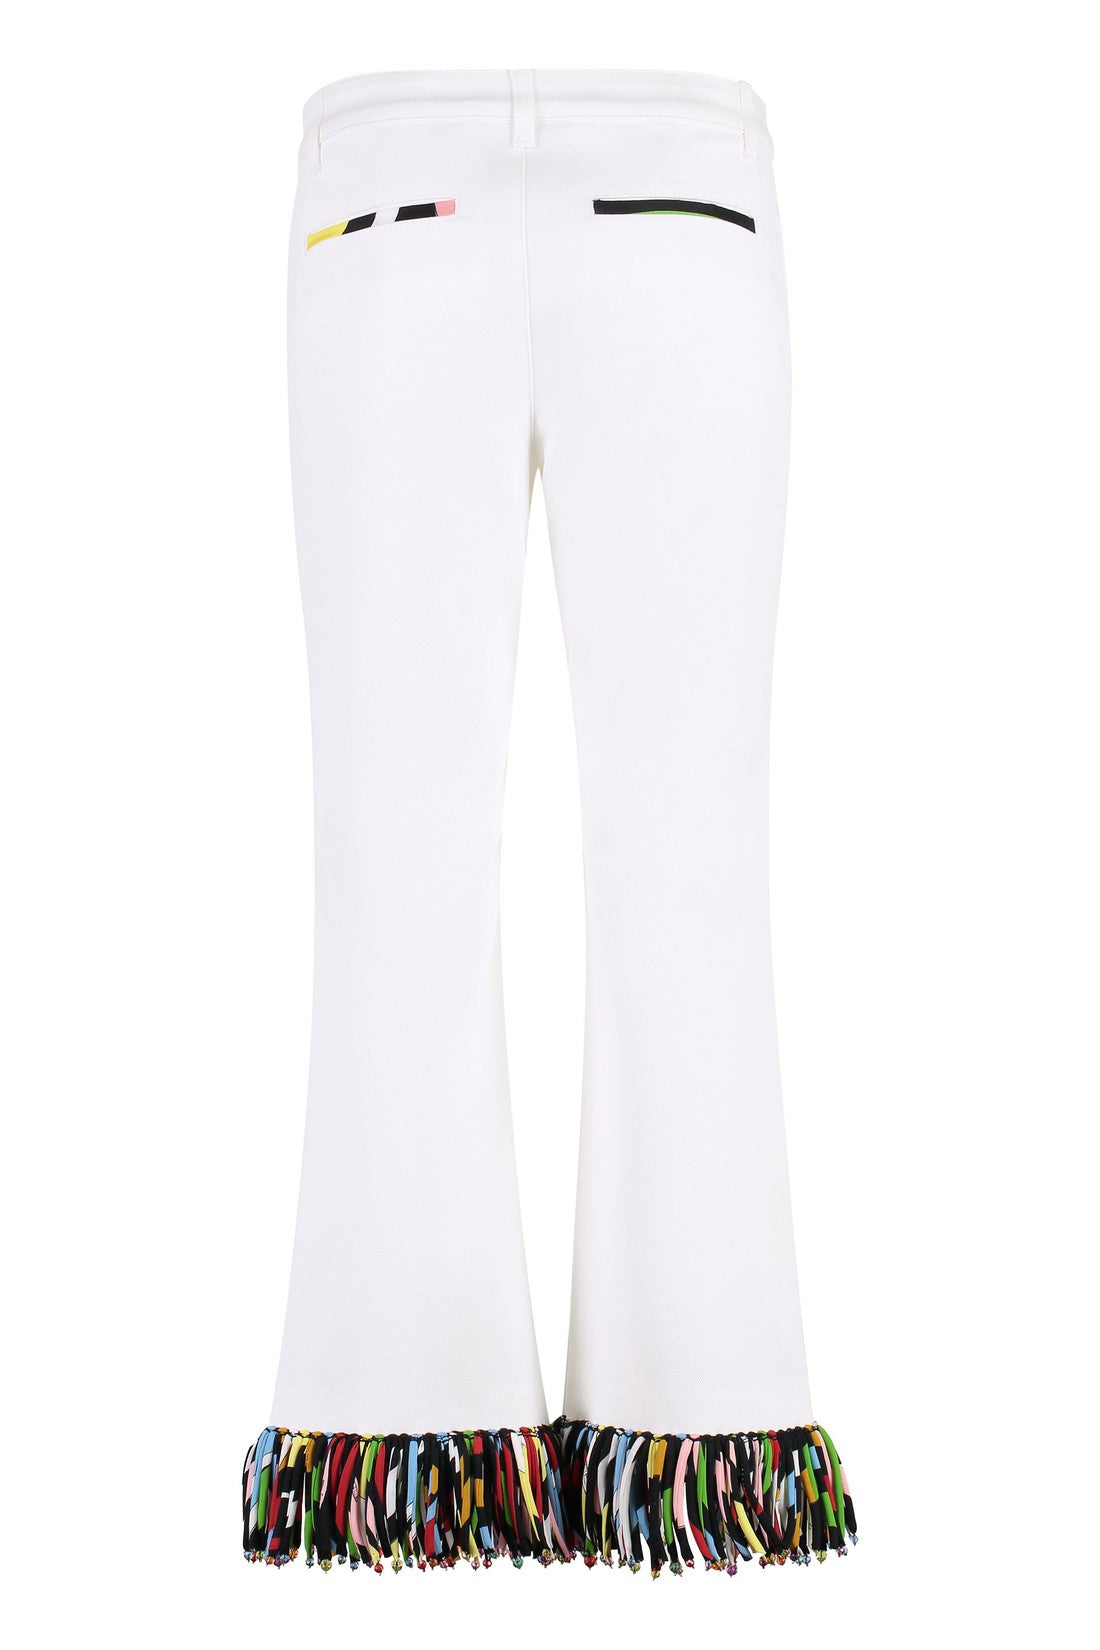 Emilio Pucci-OUTLET-SALE-Cropped flared trousers-ARCHIVIST